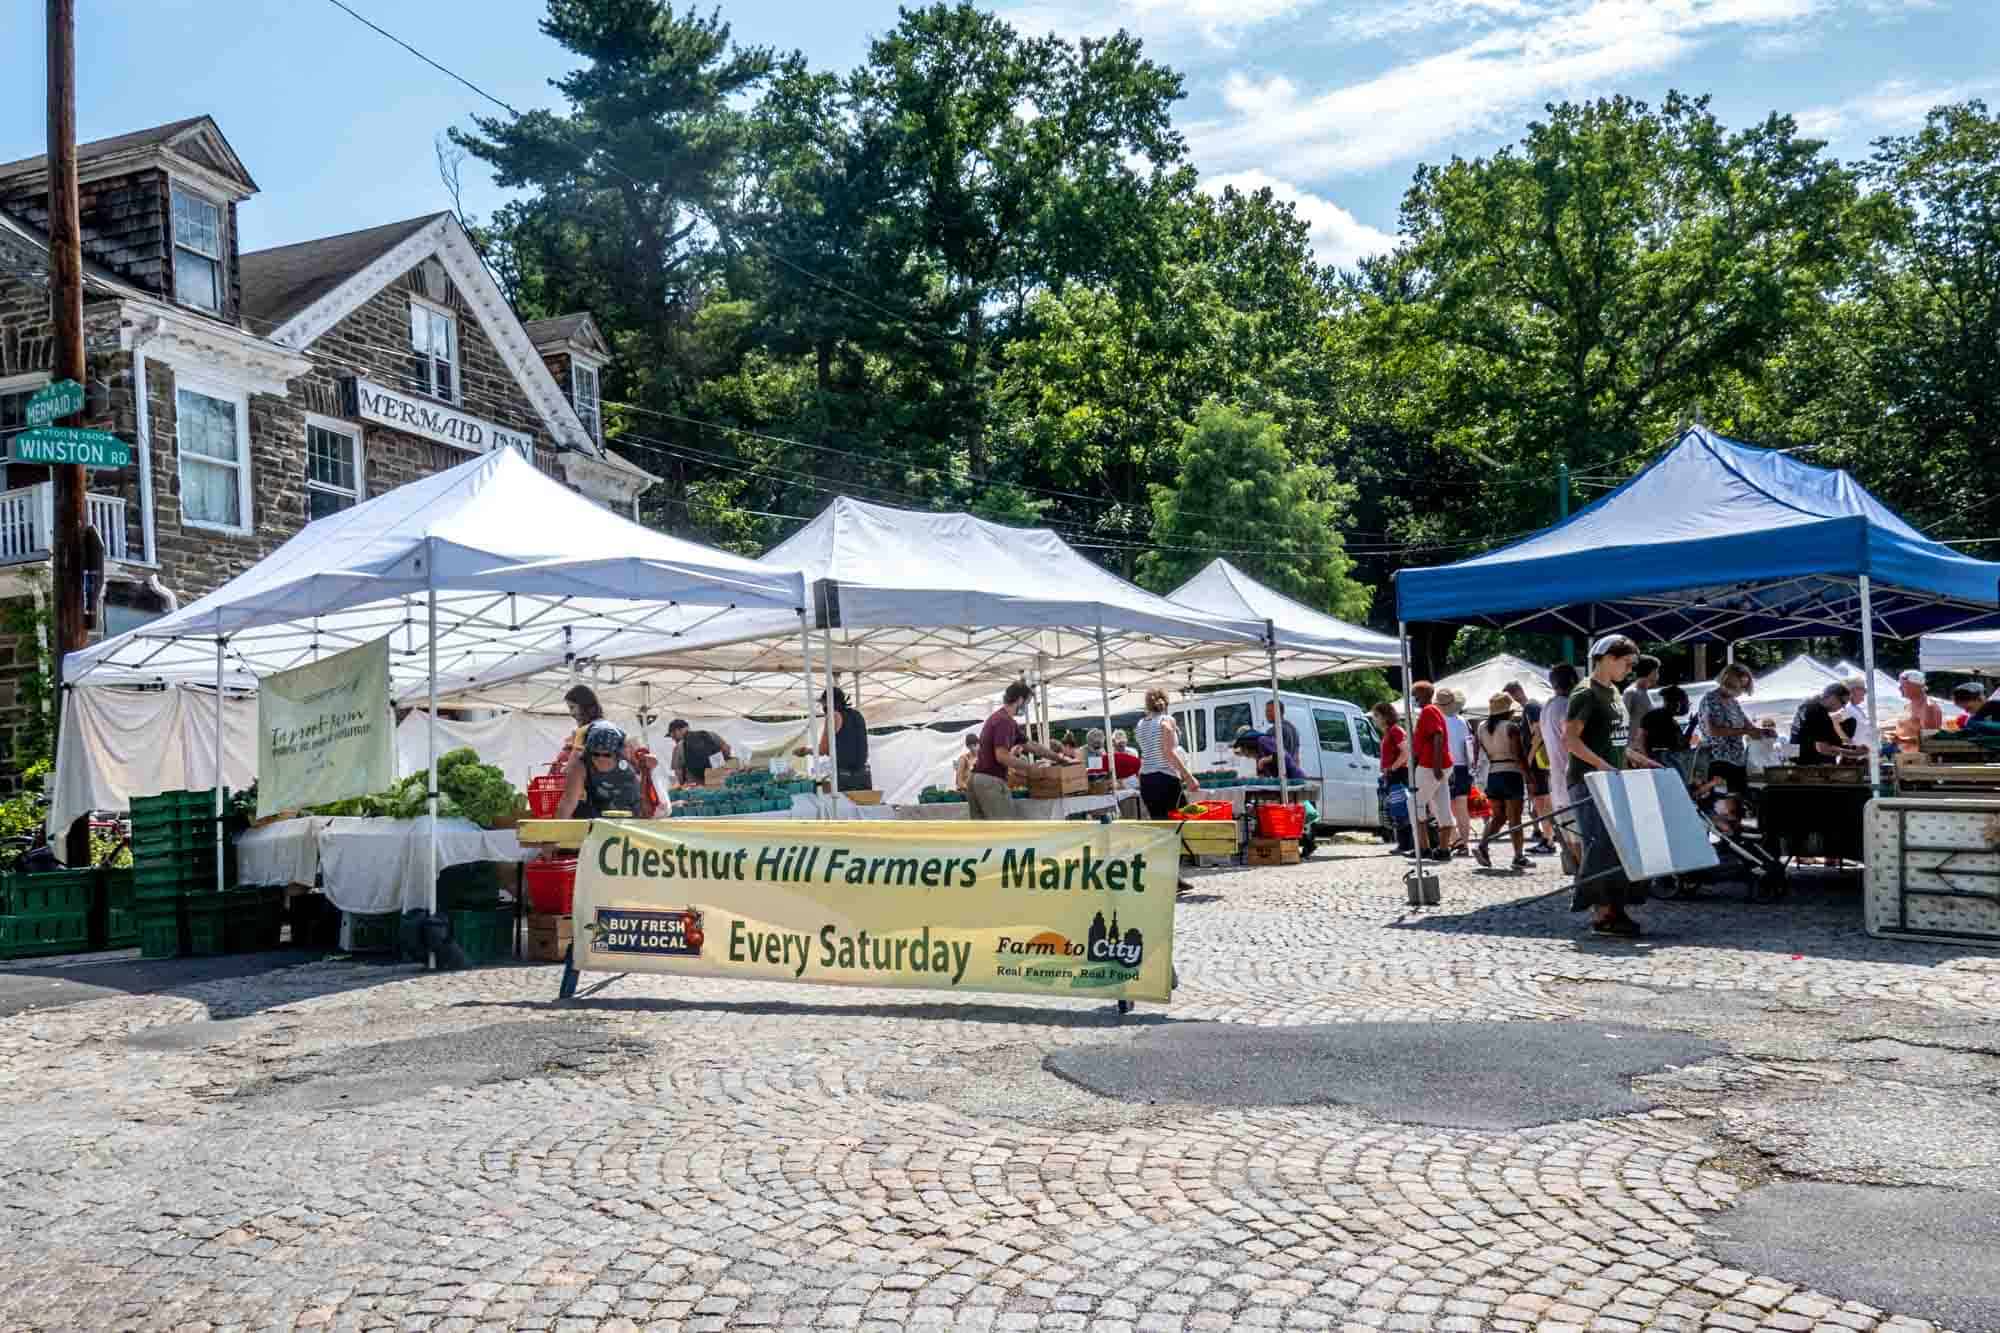 Tents by sign reading "Chestnut Hill Farmers' Market Every Saturday"